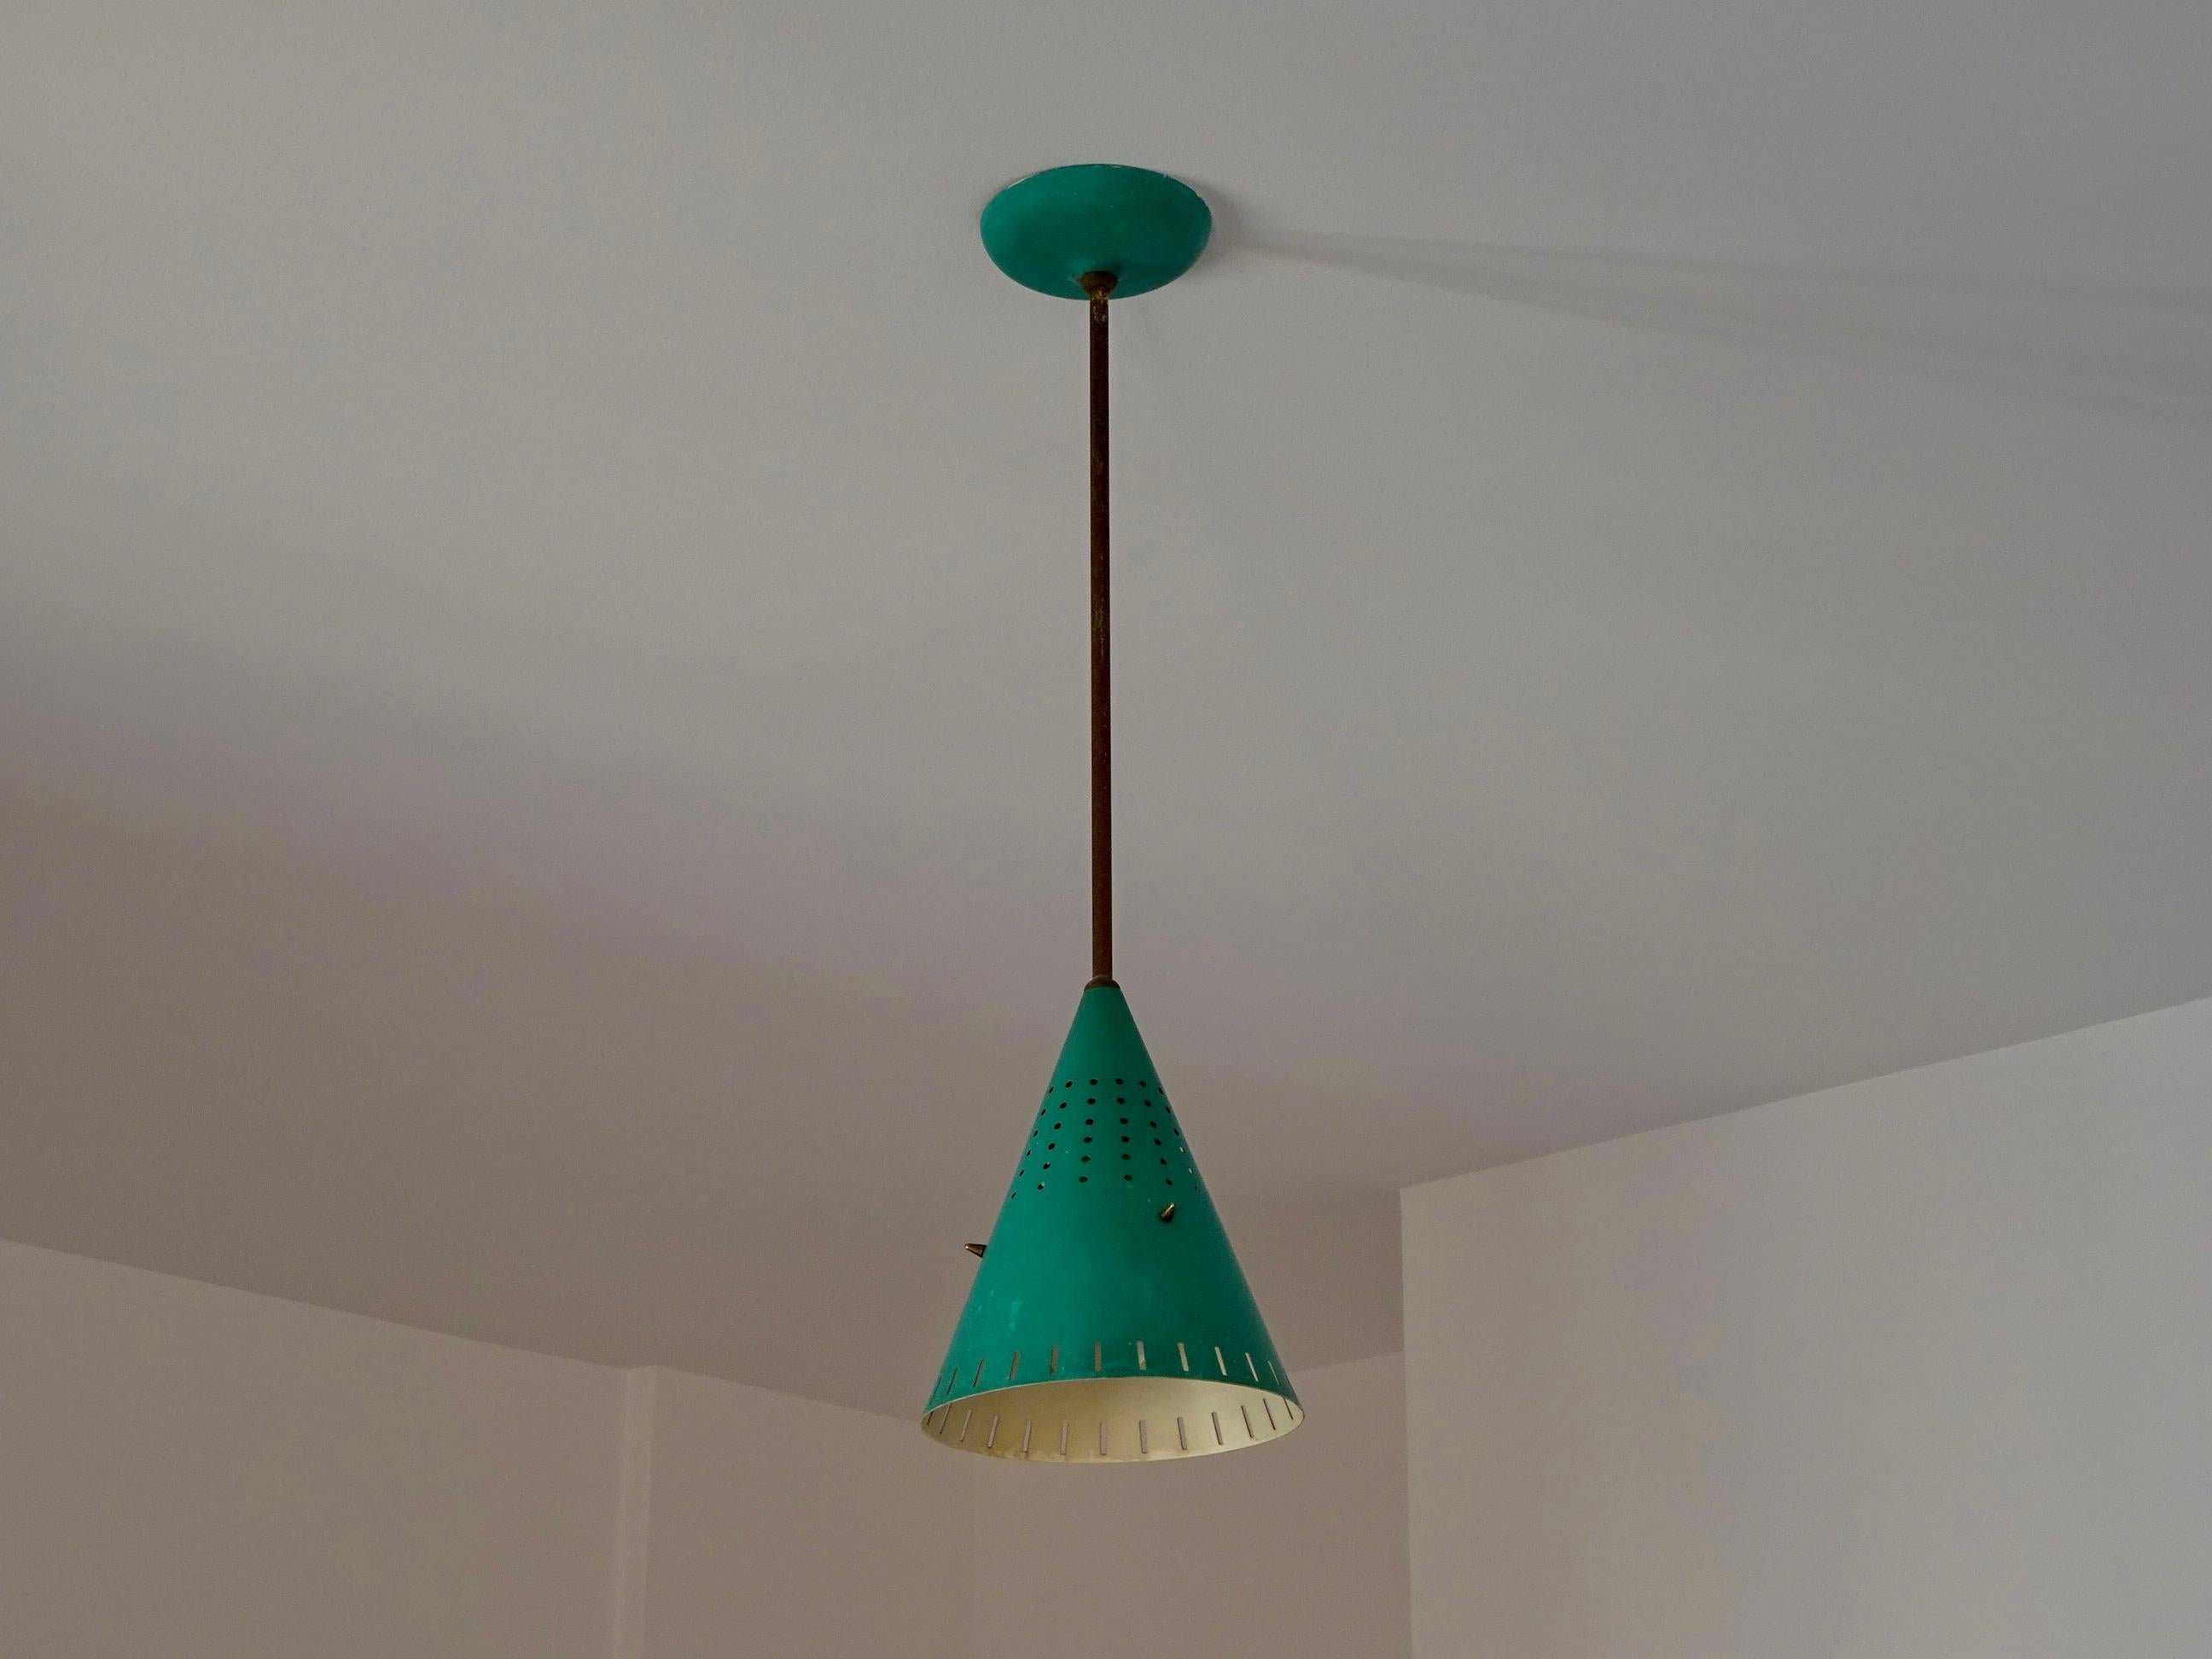 Ceiling light with conical shade, made of green aluminum, the stem and the rest of the details are made of brass. The shade has several perforations that reflect the light on the ceiling creating a special atmosphere.